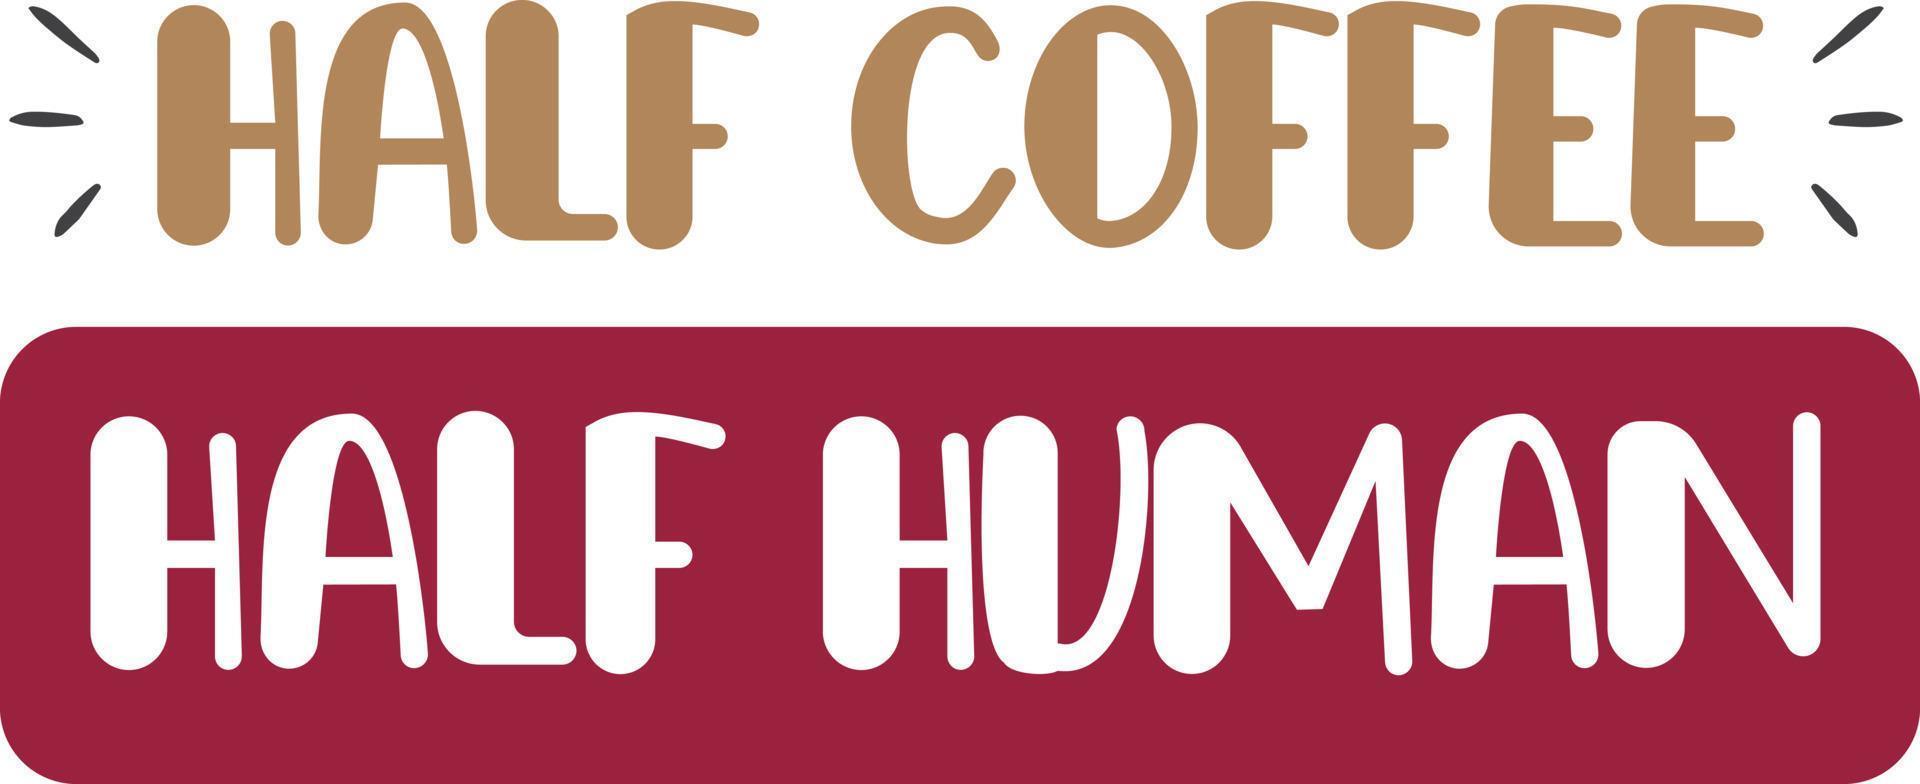 Half Coffee Half Human lettering and coffee quote illustration vector